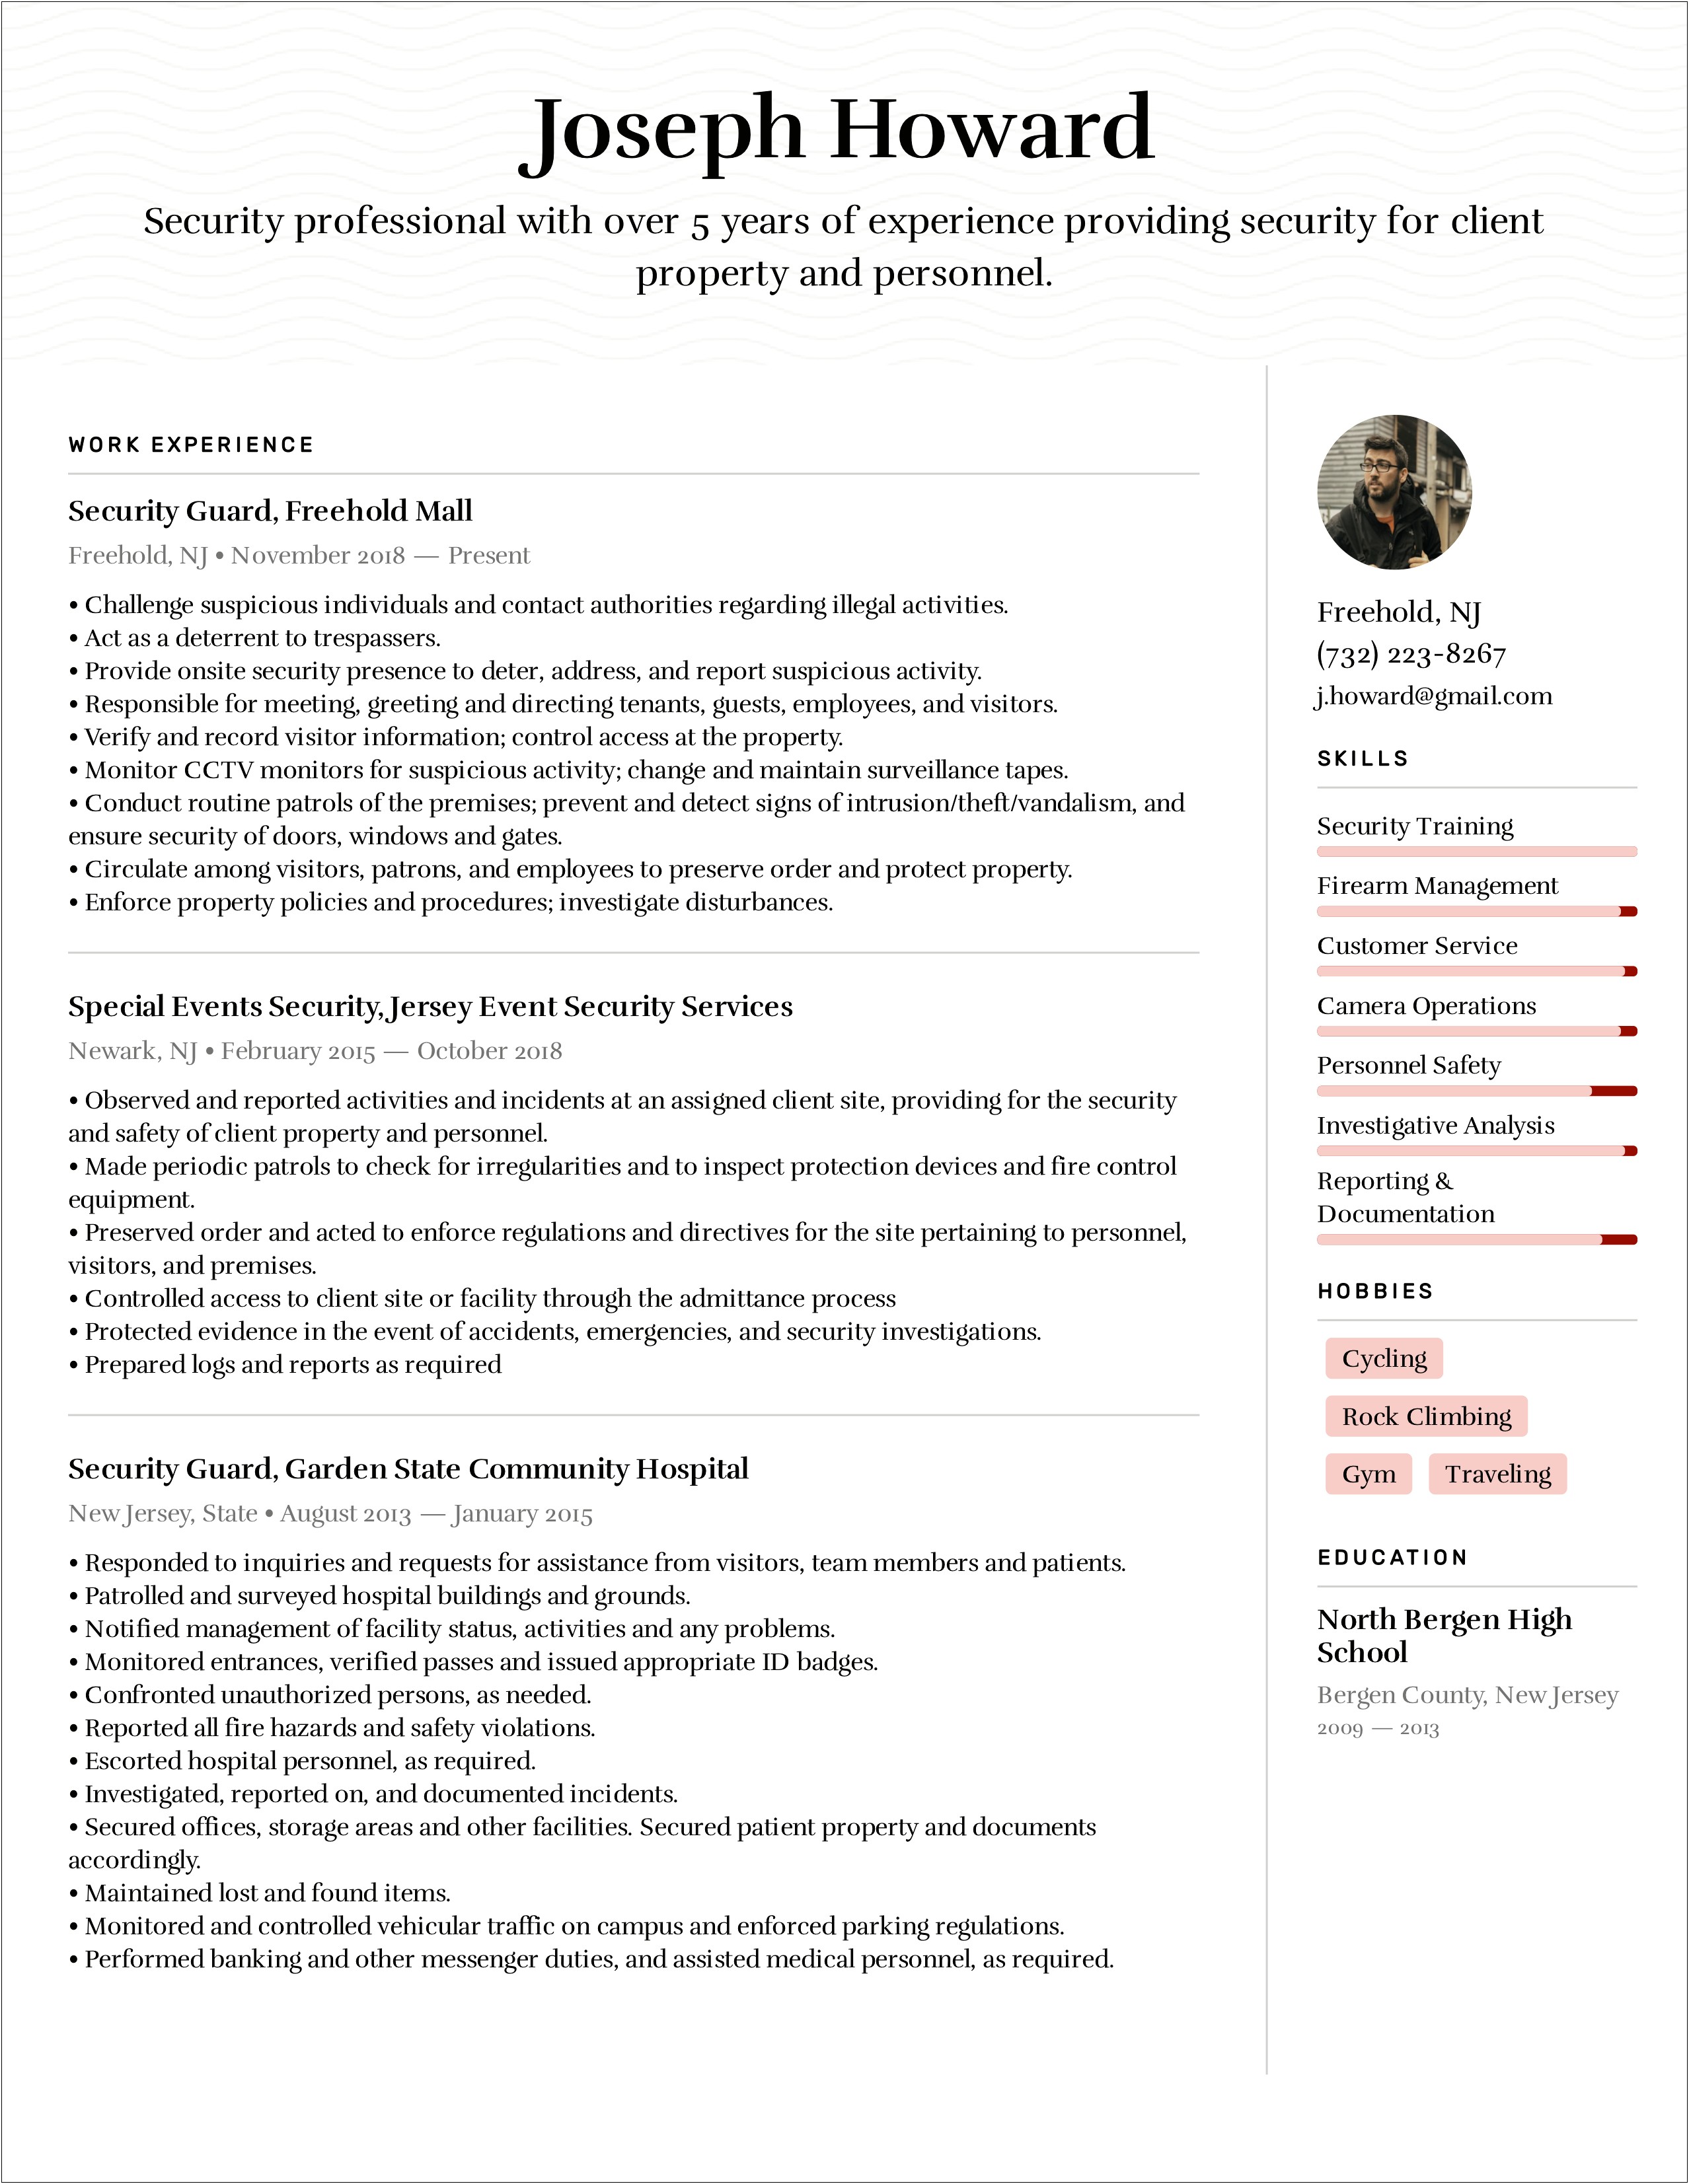 Hobbies And Interests In Resume Examples